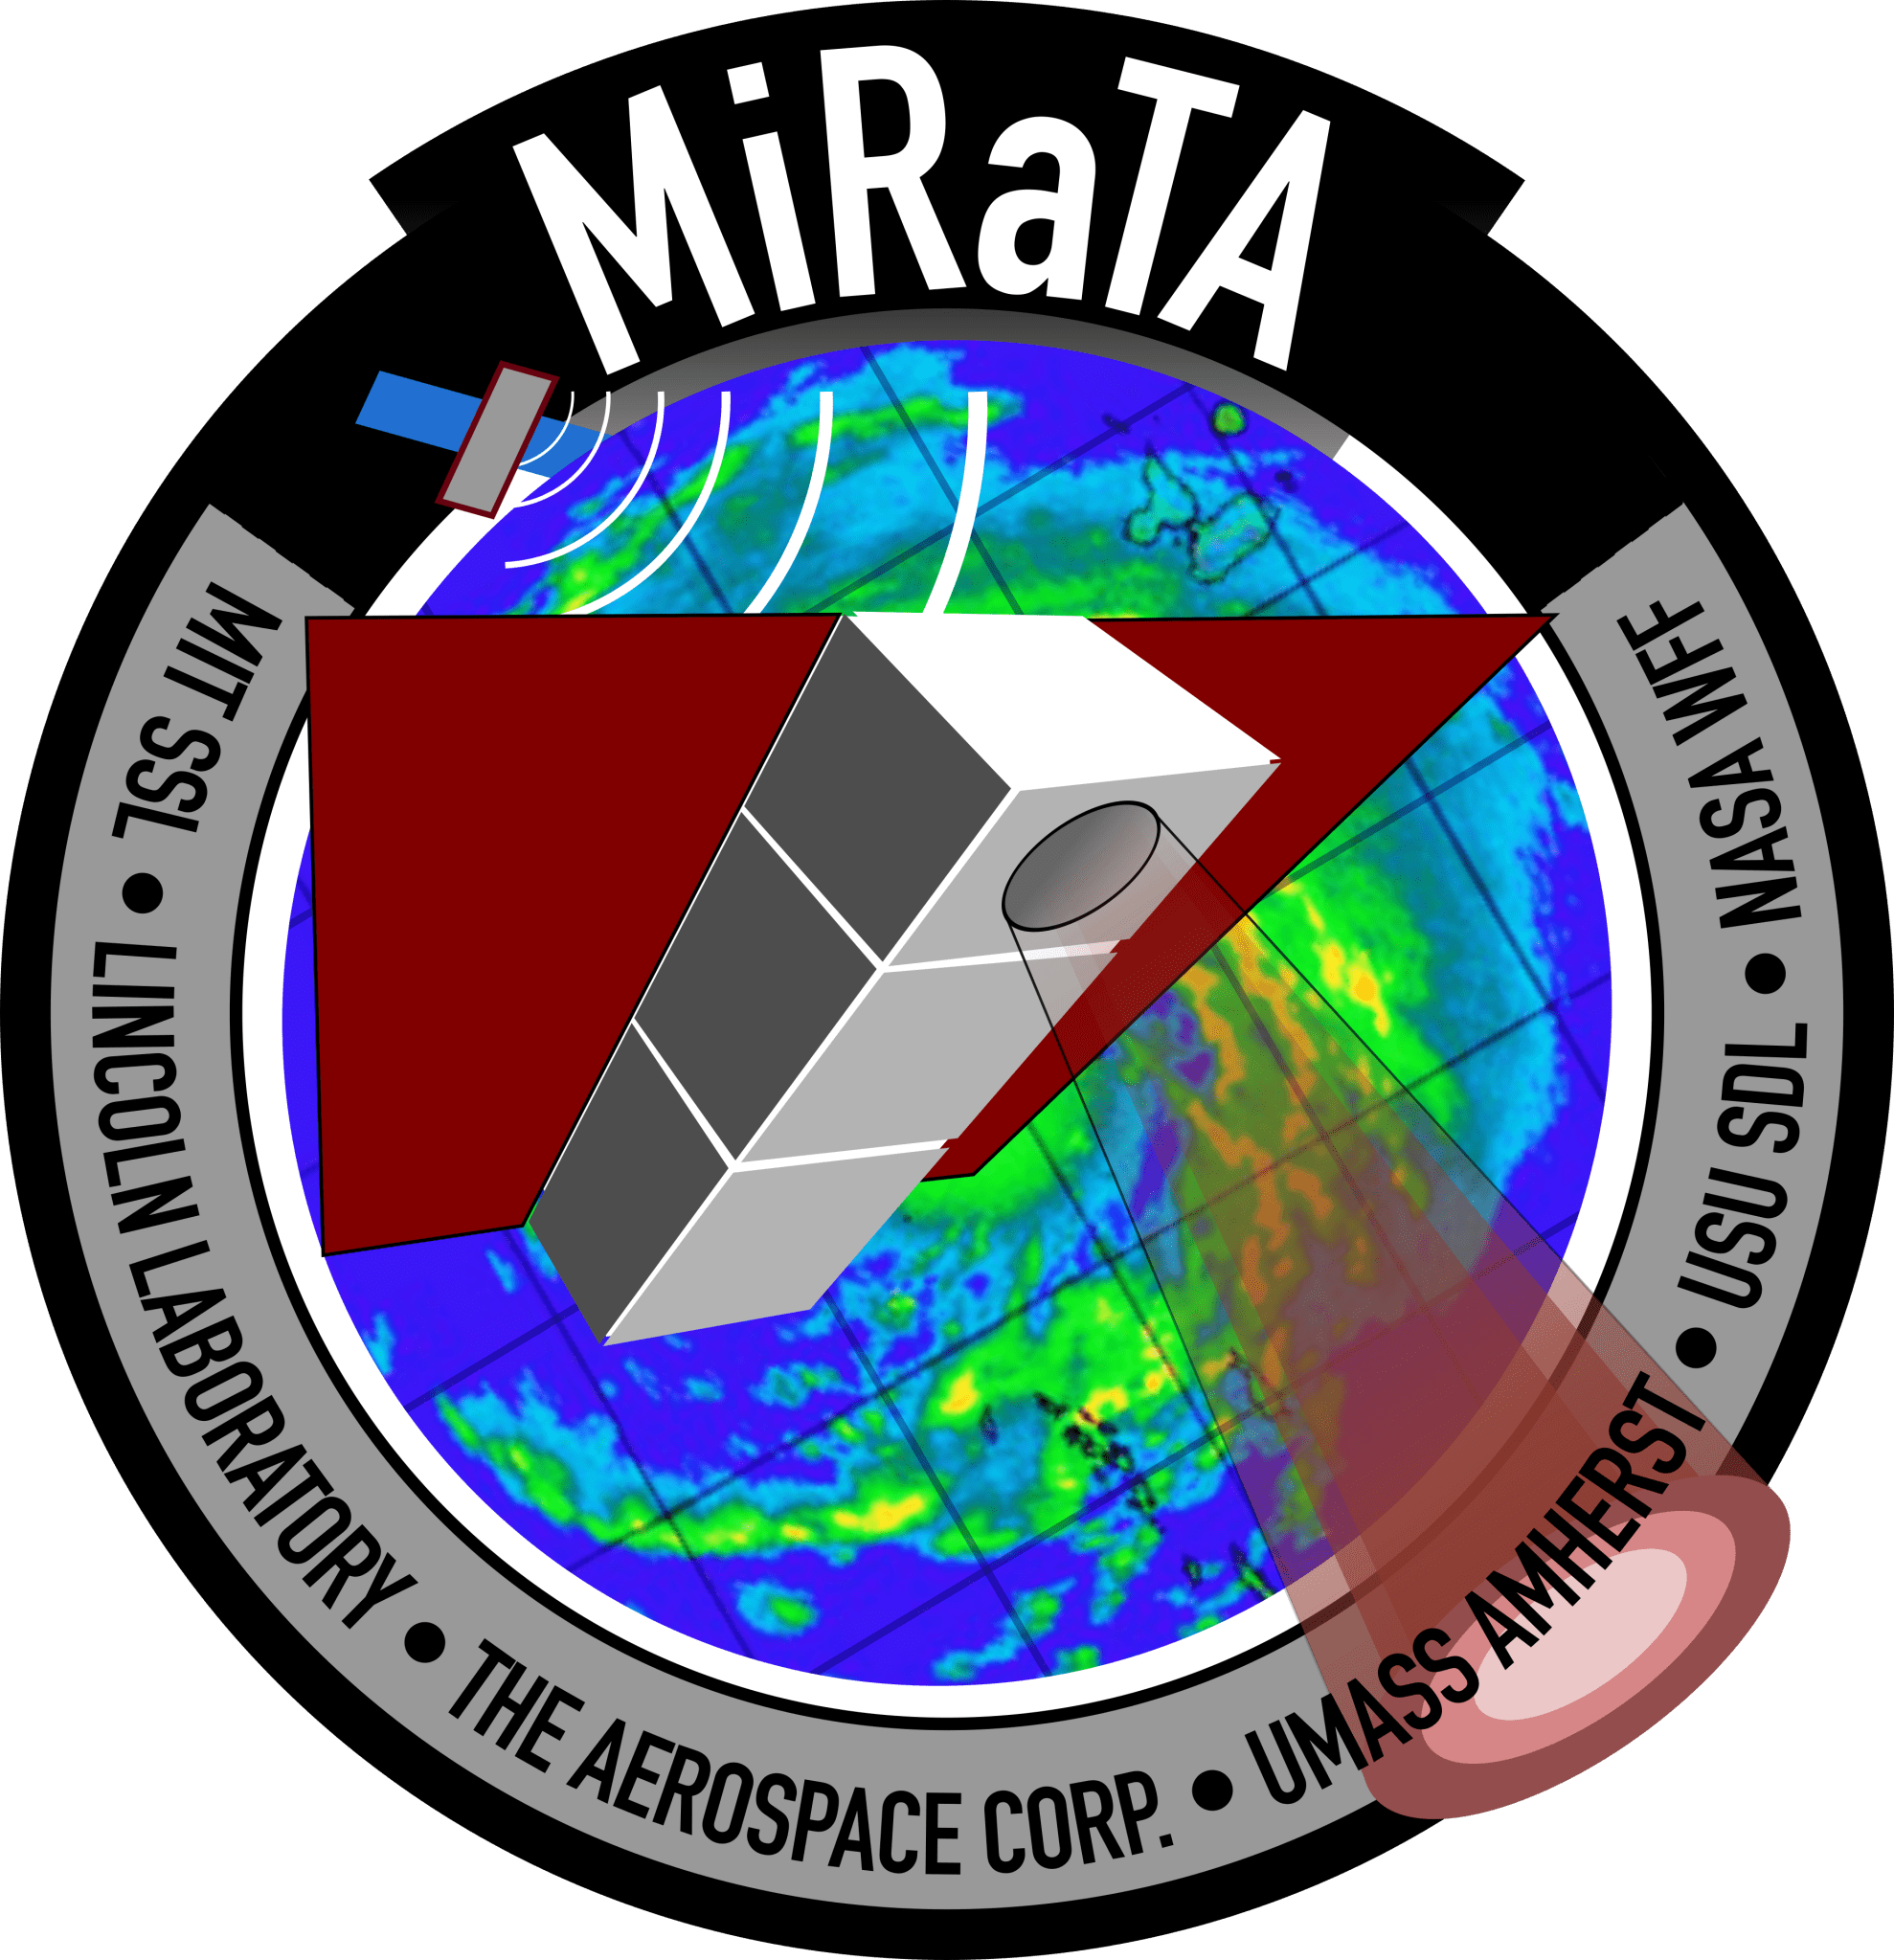 The MiRaTA logo, which has a stylized image of the small satellite in the center, superimposed over a stylized weather forecast. Around the edge, text reads MiRaTA, MIT SSL, Lincoln Laboratory, The Aerospace Corp, UMASS Amherst, USU SDL, NASA WFF."